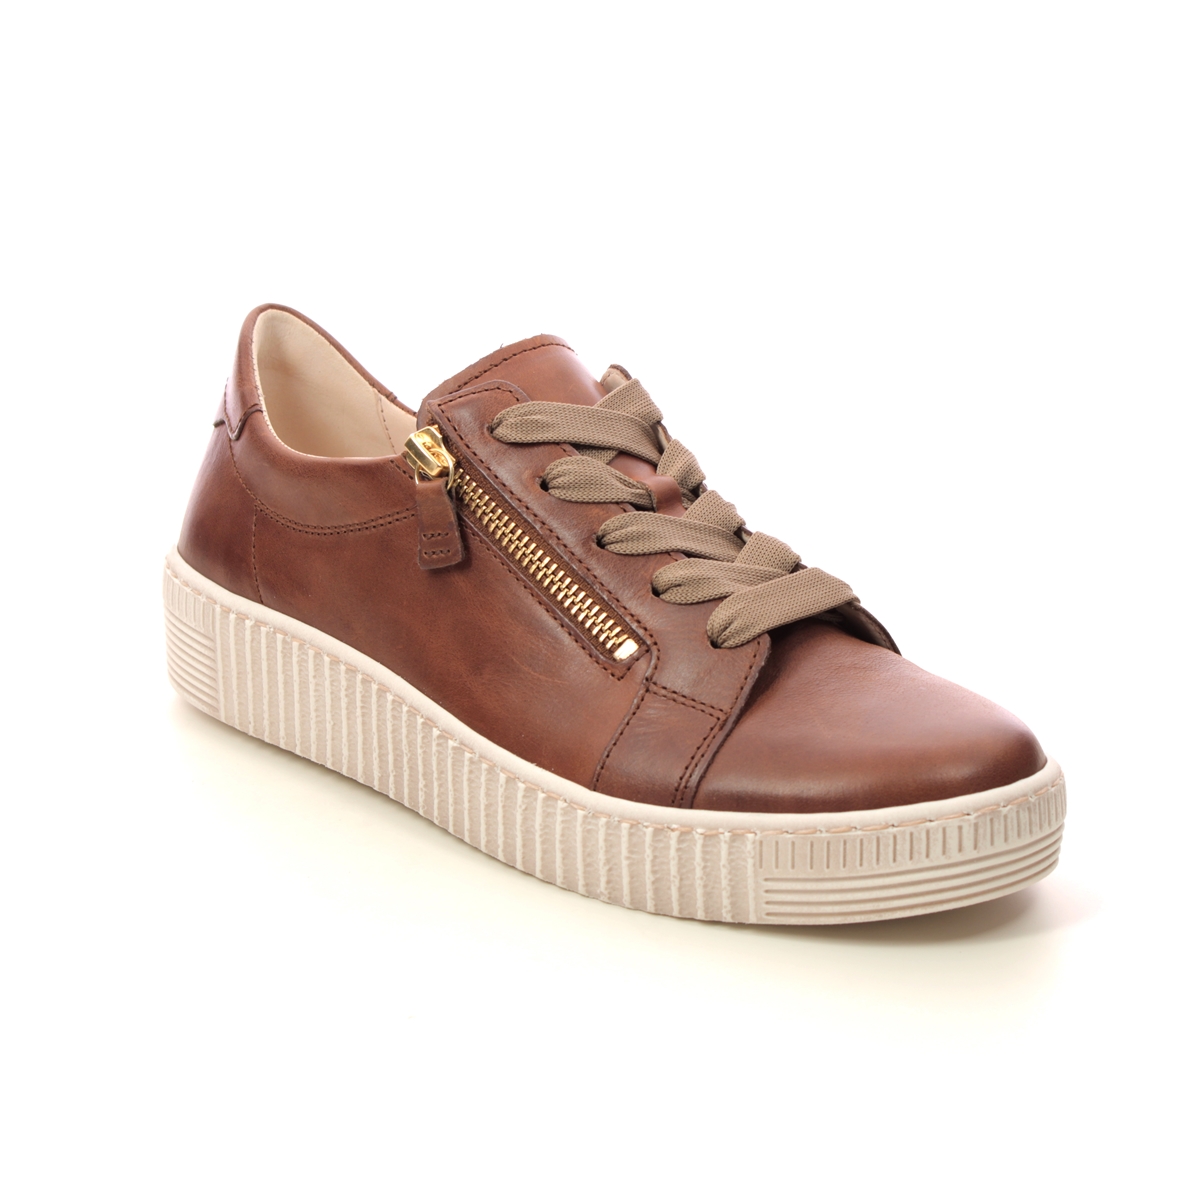 Gabor Wisdom Tan Leather Womens Trainers 93.334.24 In Size 8 In Plain Tan Leather  Womens Trainers In Soft Tan Leather Leather